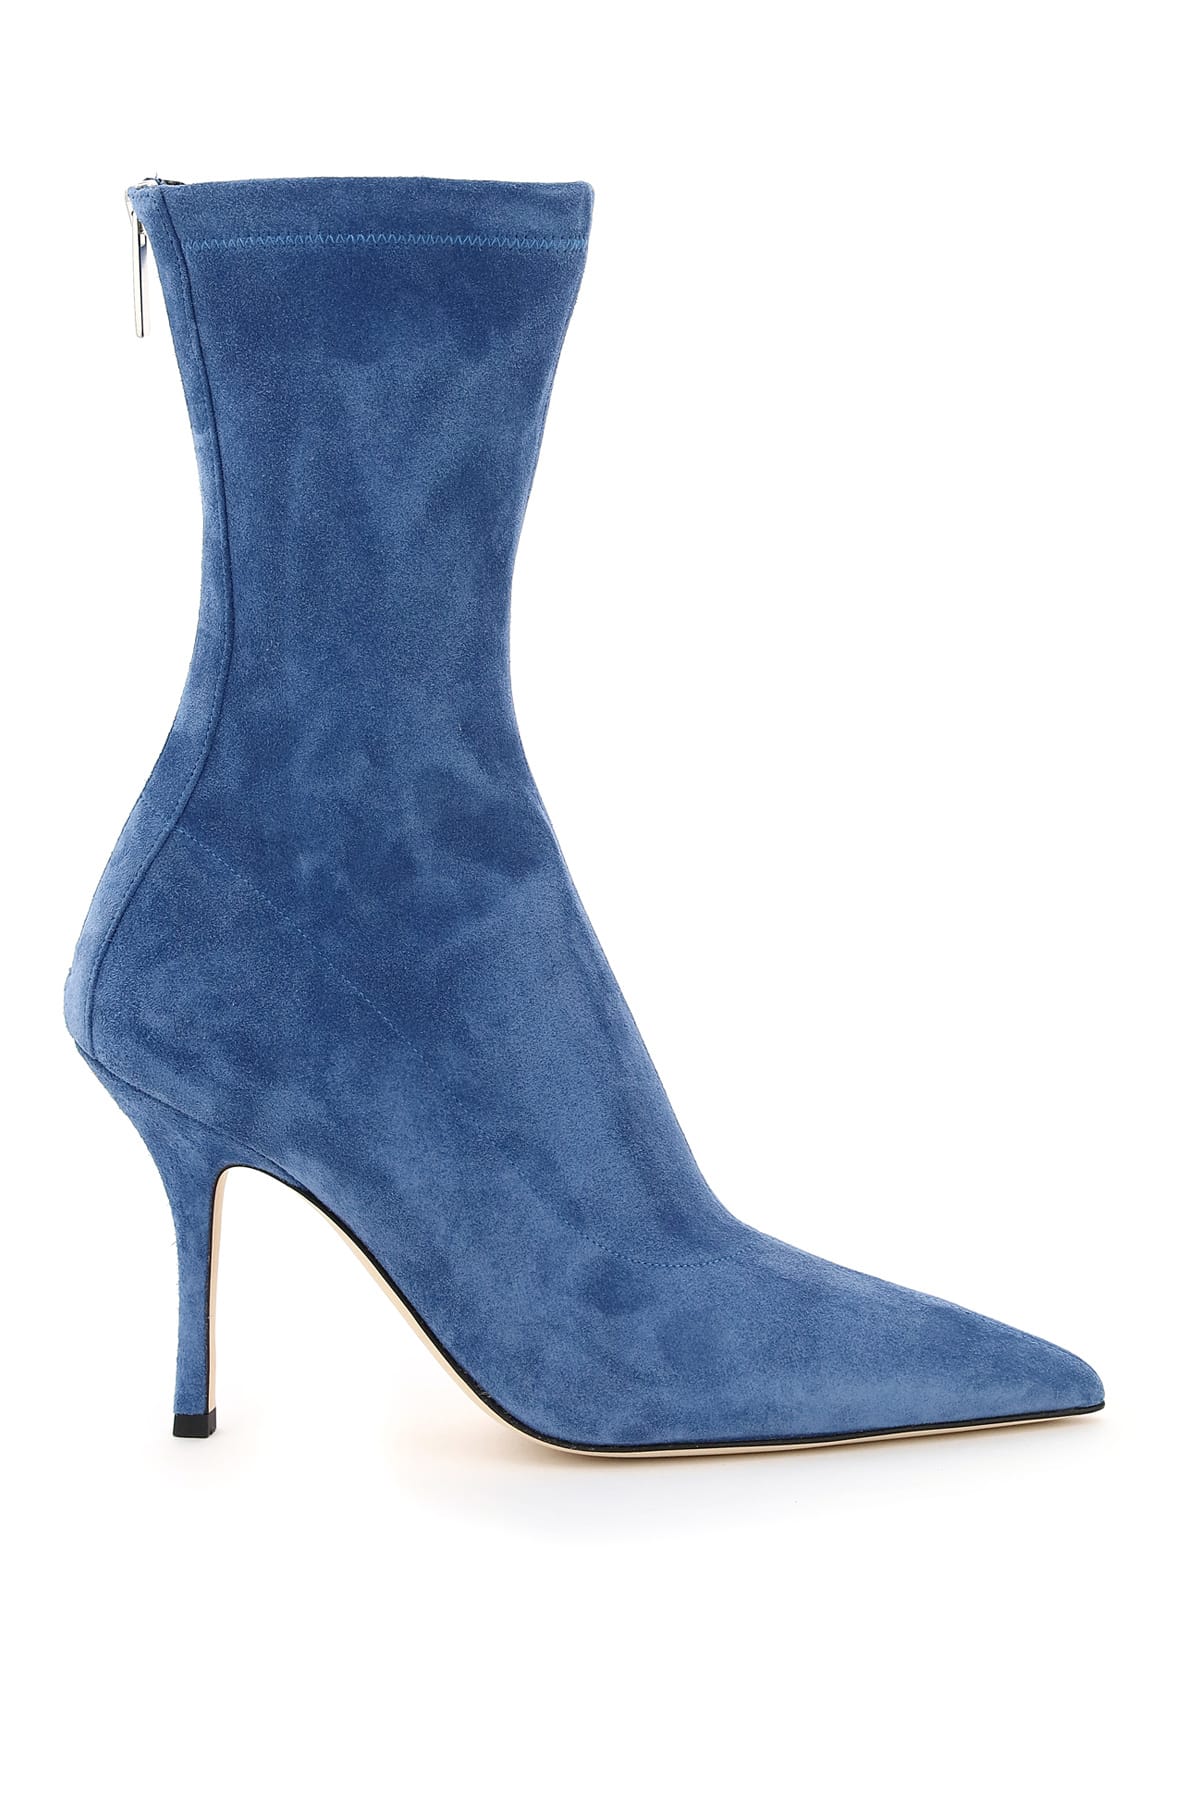 Paris Texas Mama Ankle Boots In Suede